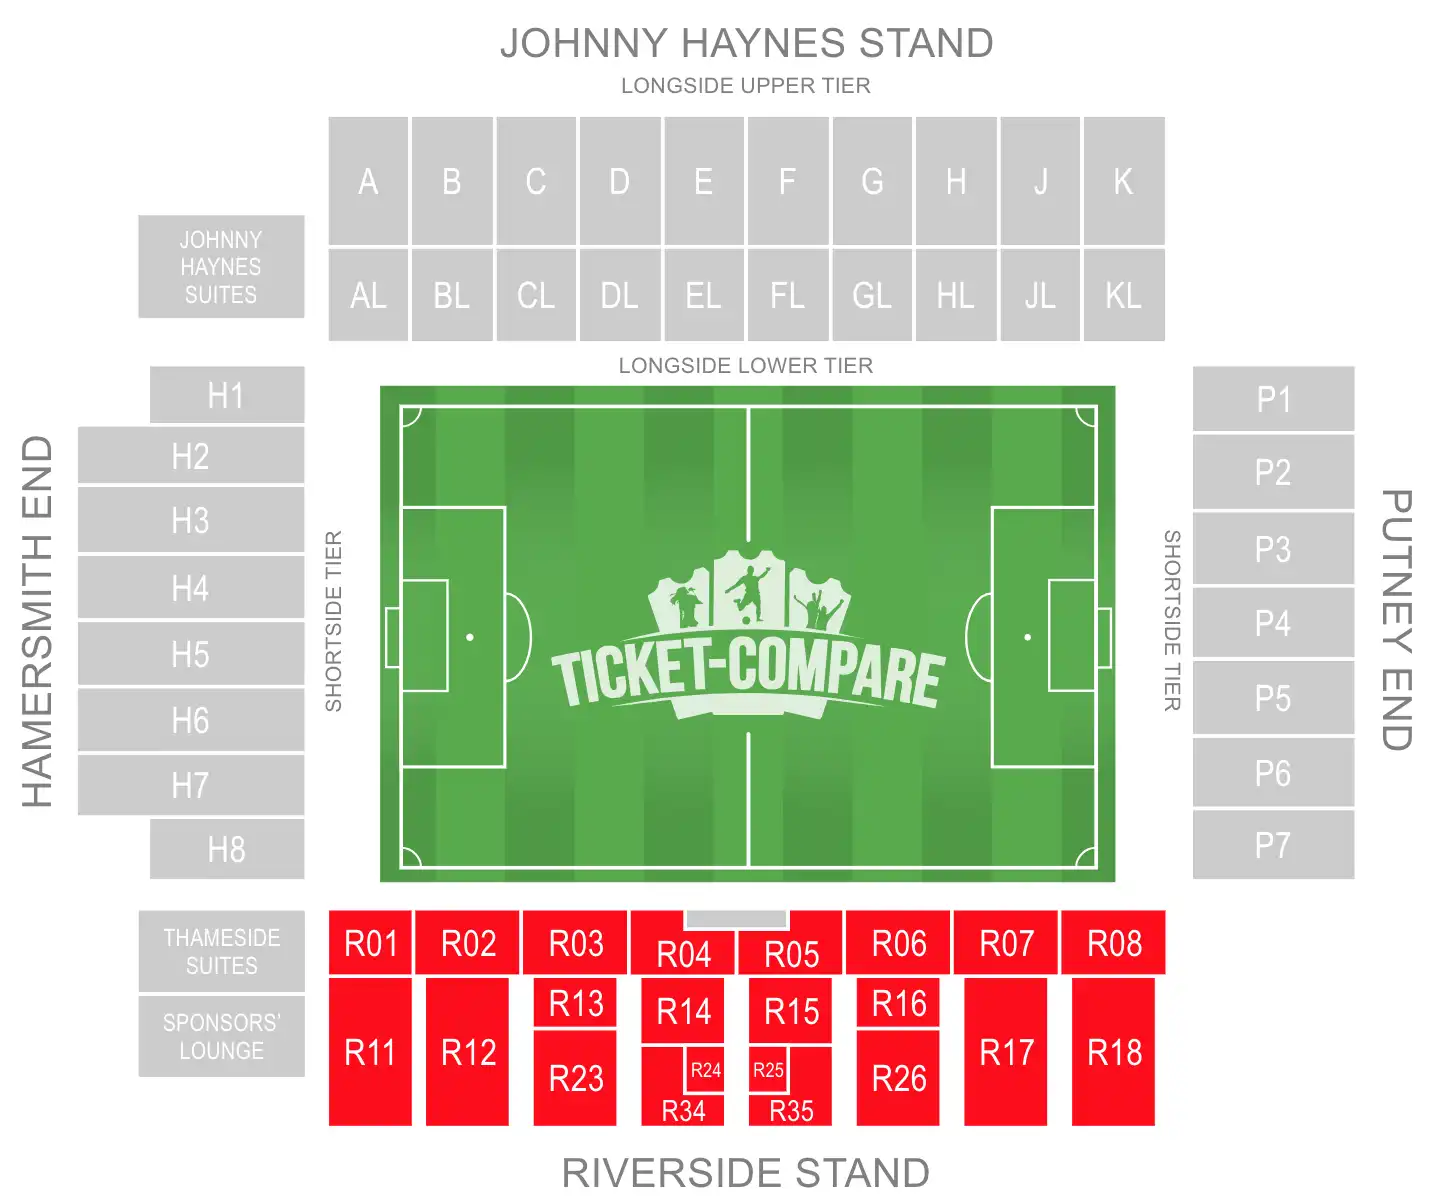 Craven Cottage Seating Plan with highligted the Riverside Stand